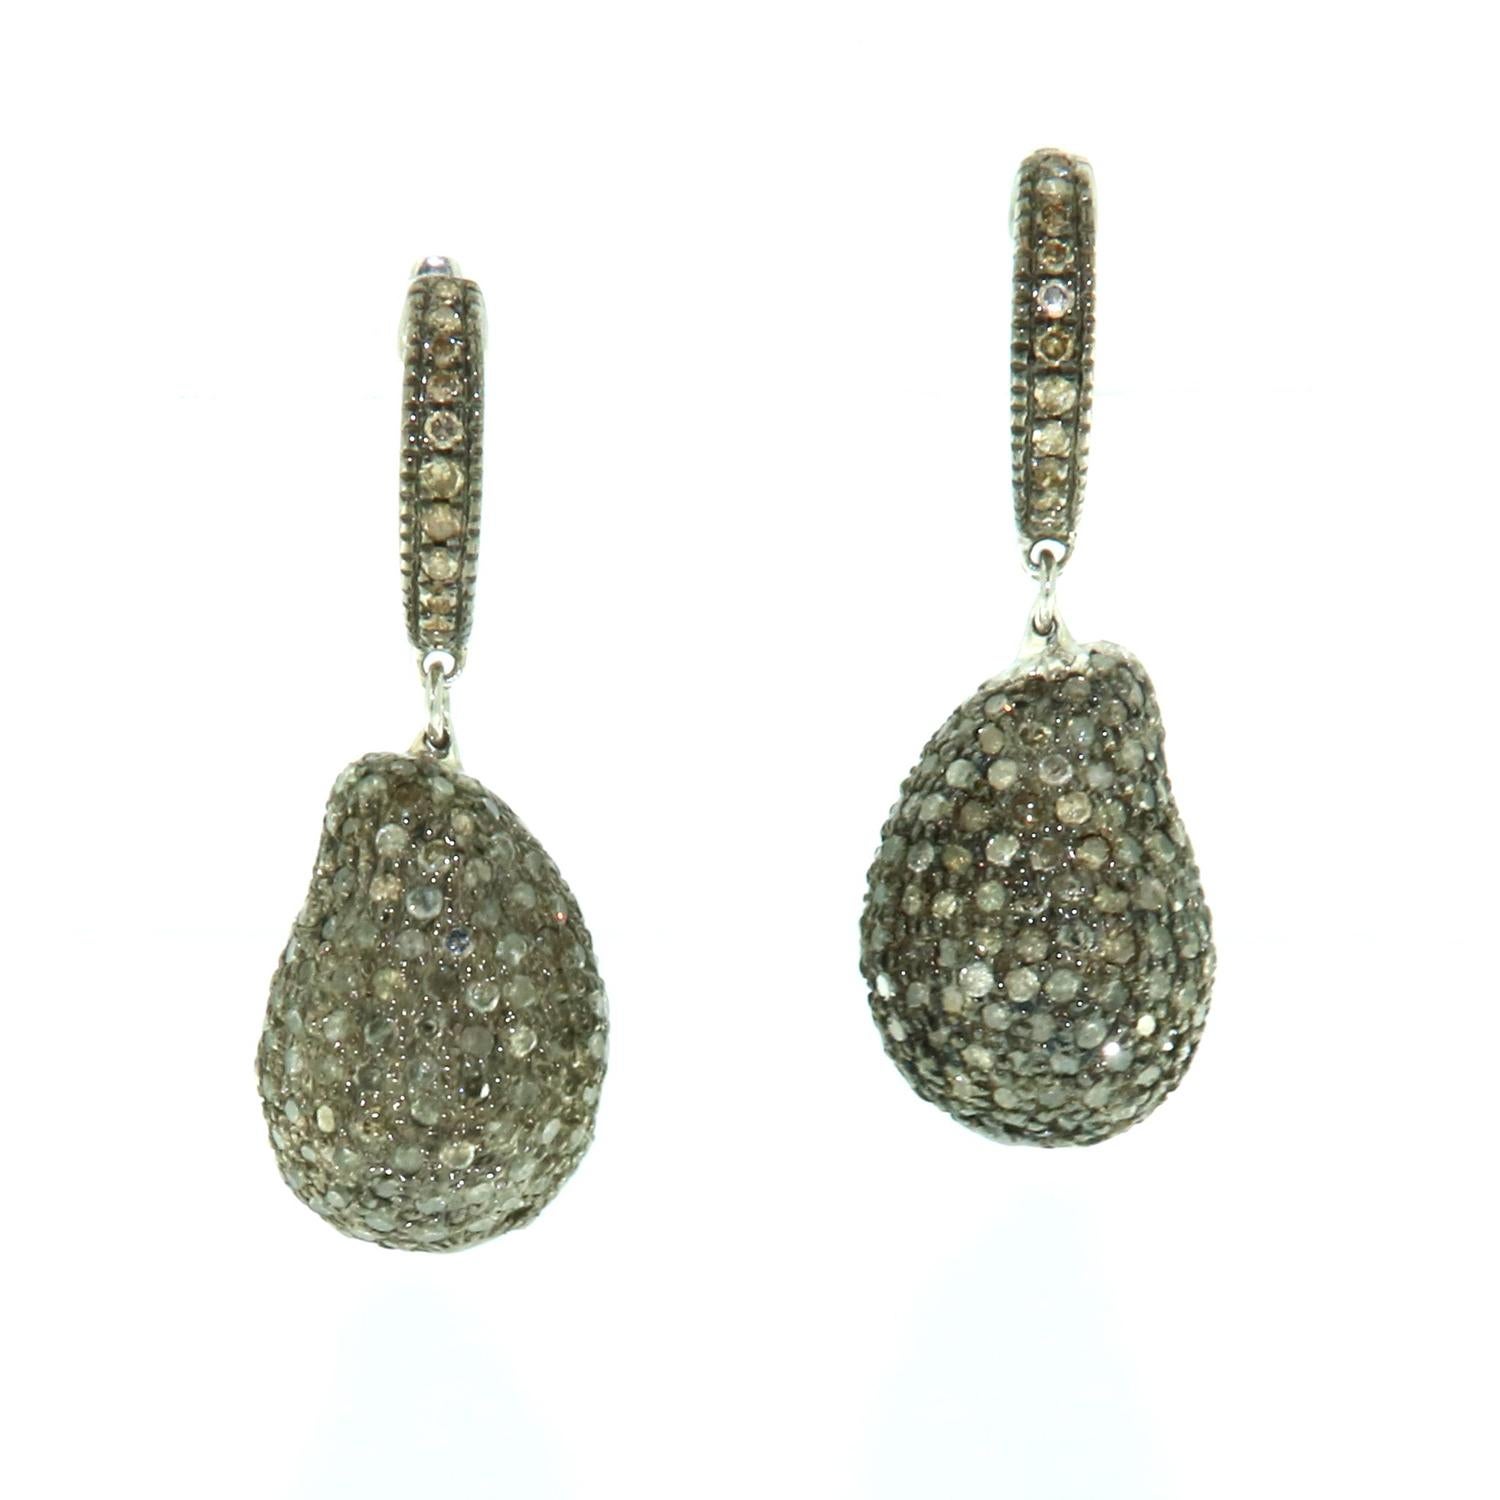 Mixed Cut Nugget Shaped Pave Diamond Earrings made In 18k Gold & Silver For Sale